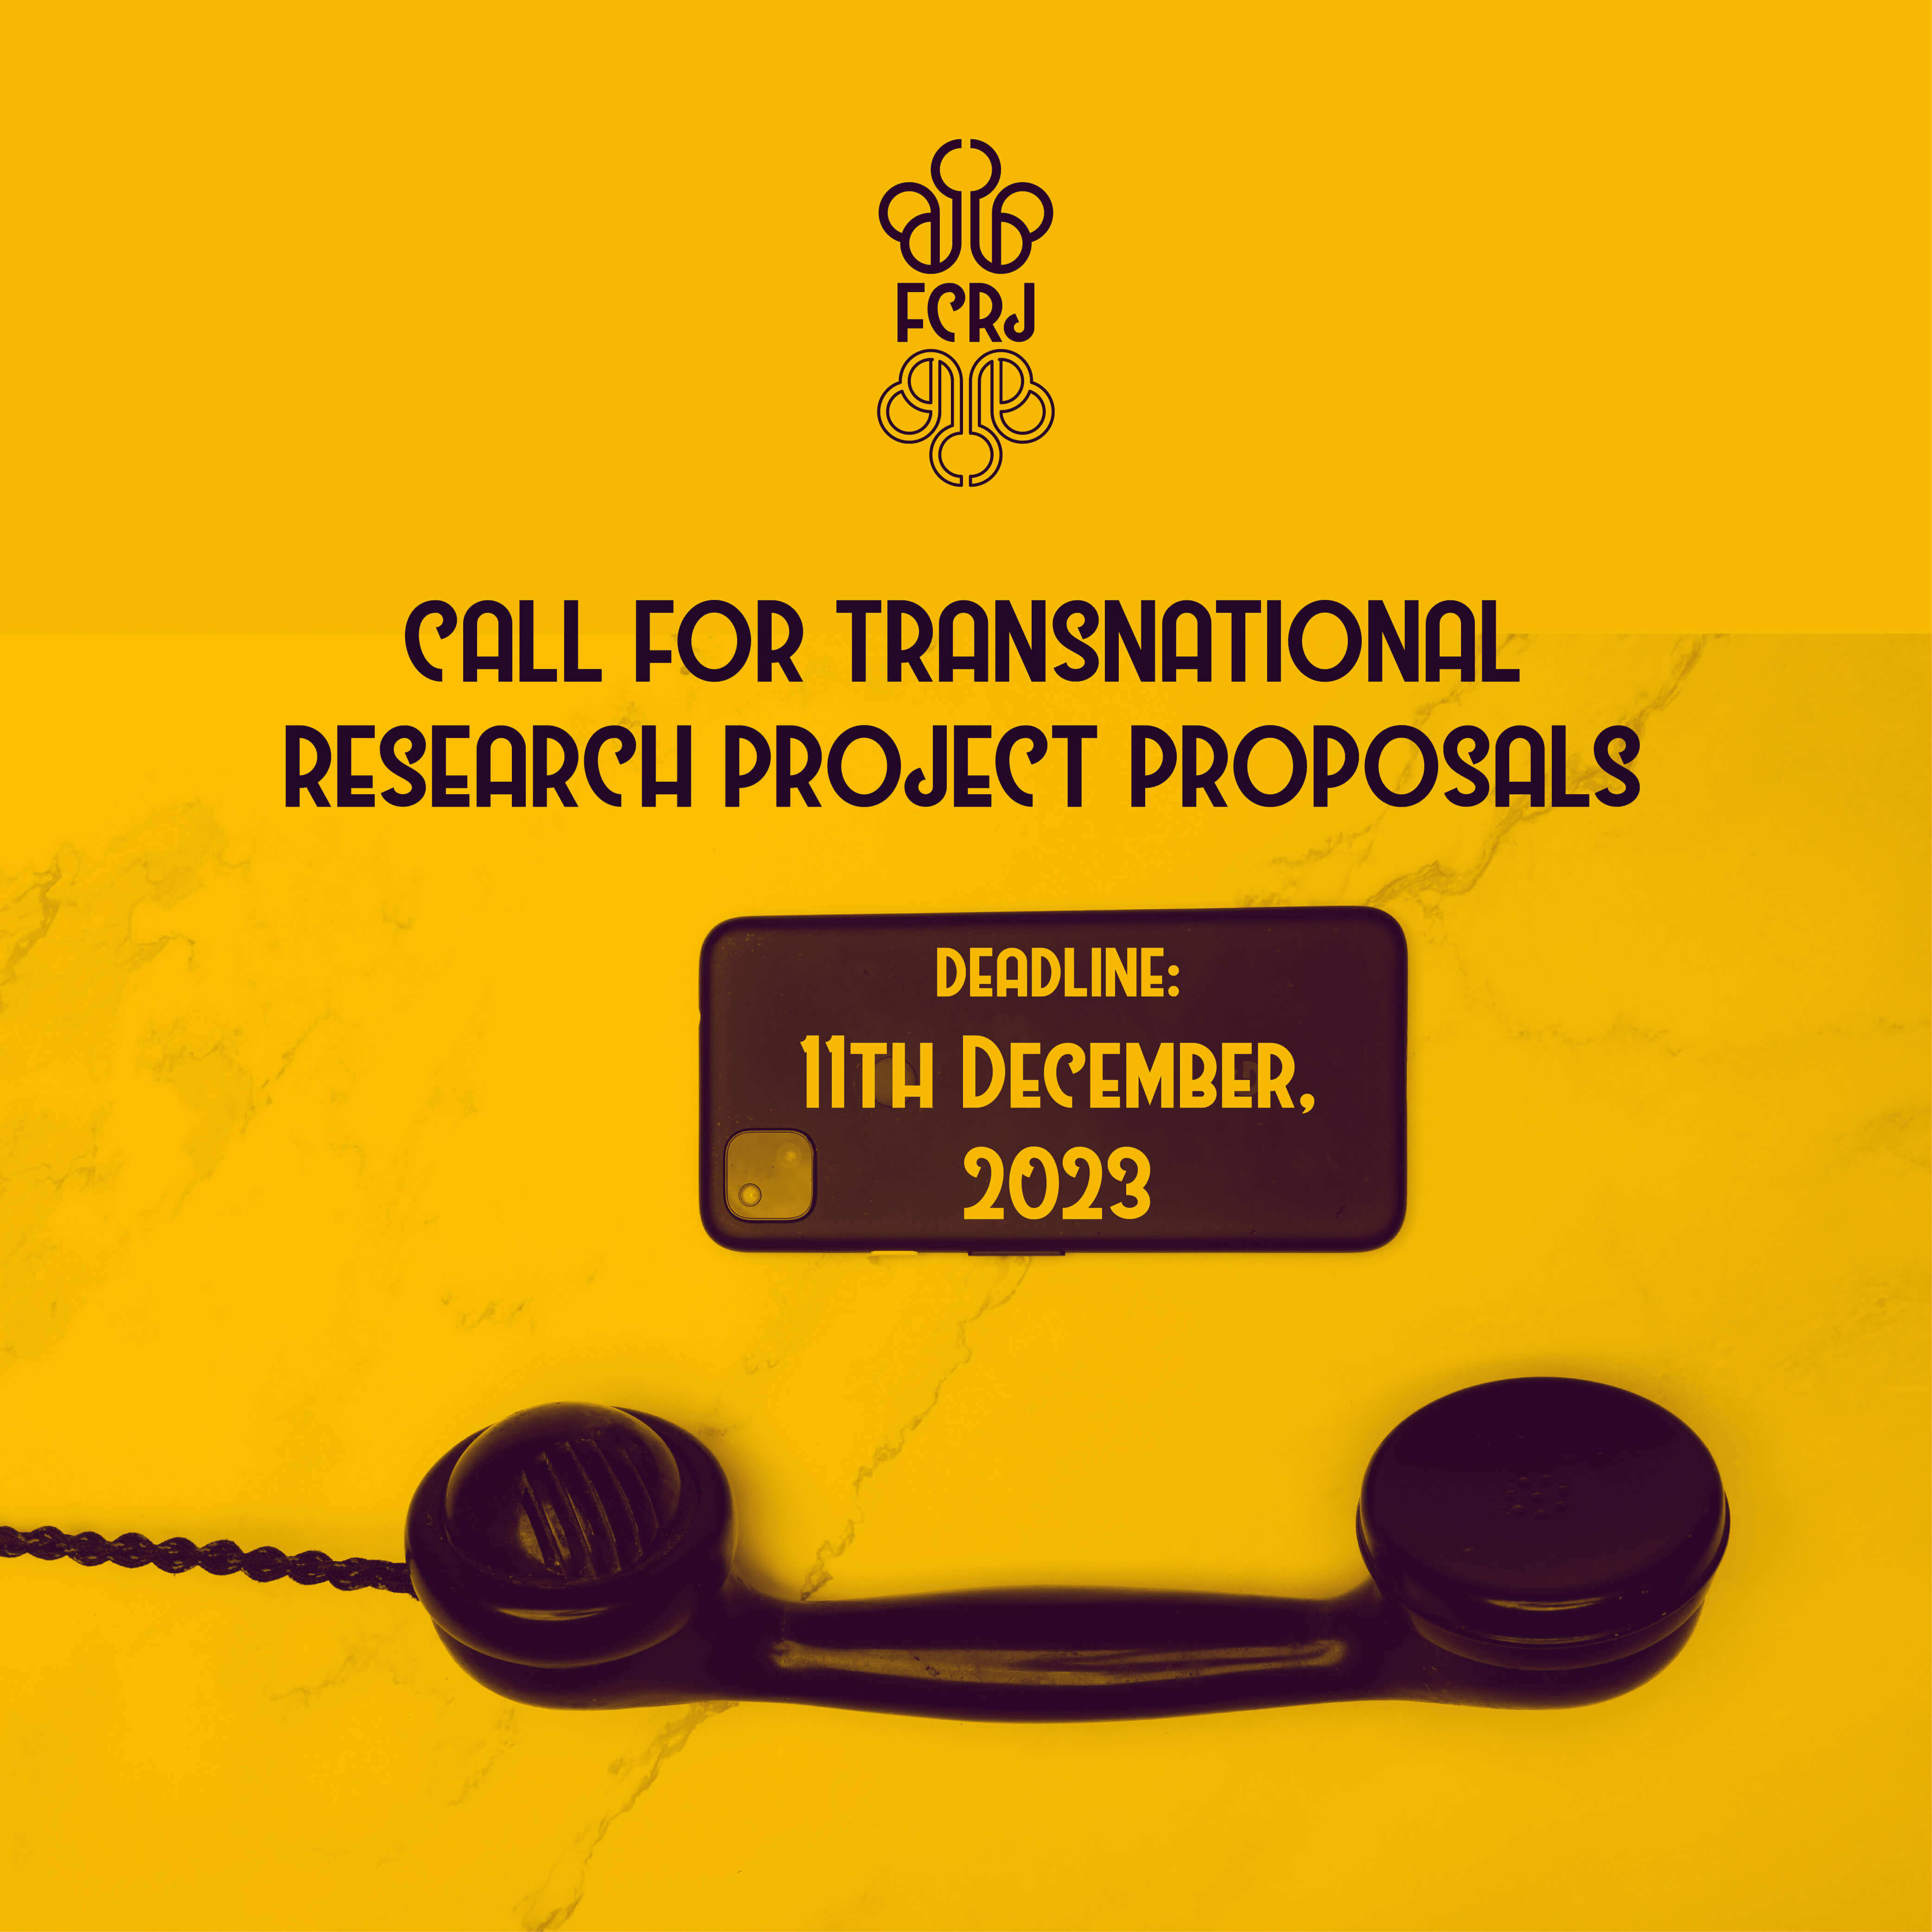 Call for Transnational Research Project Proposals